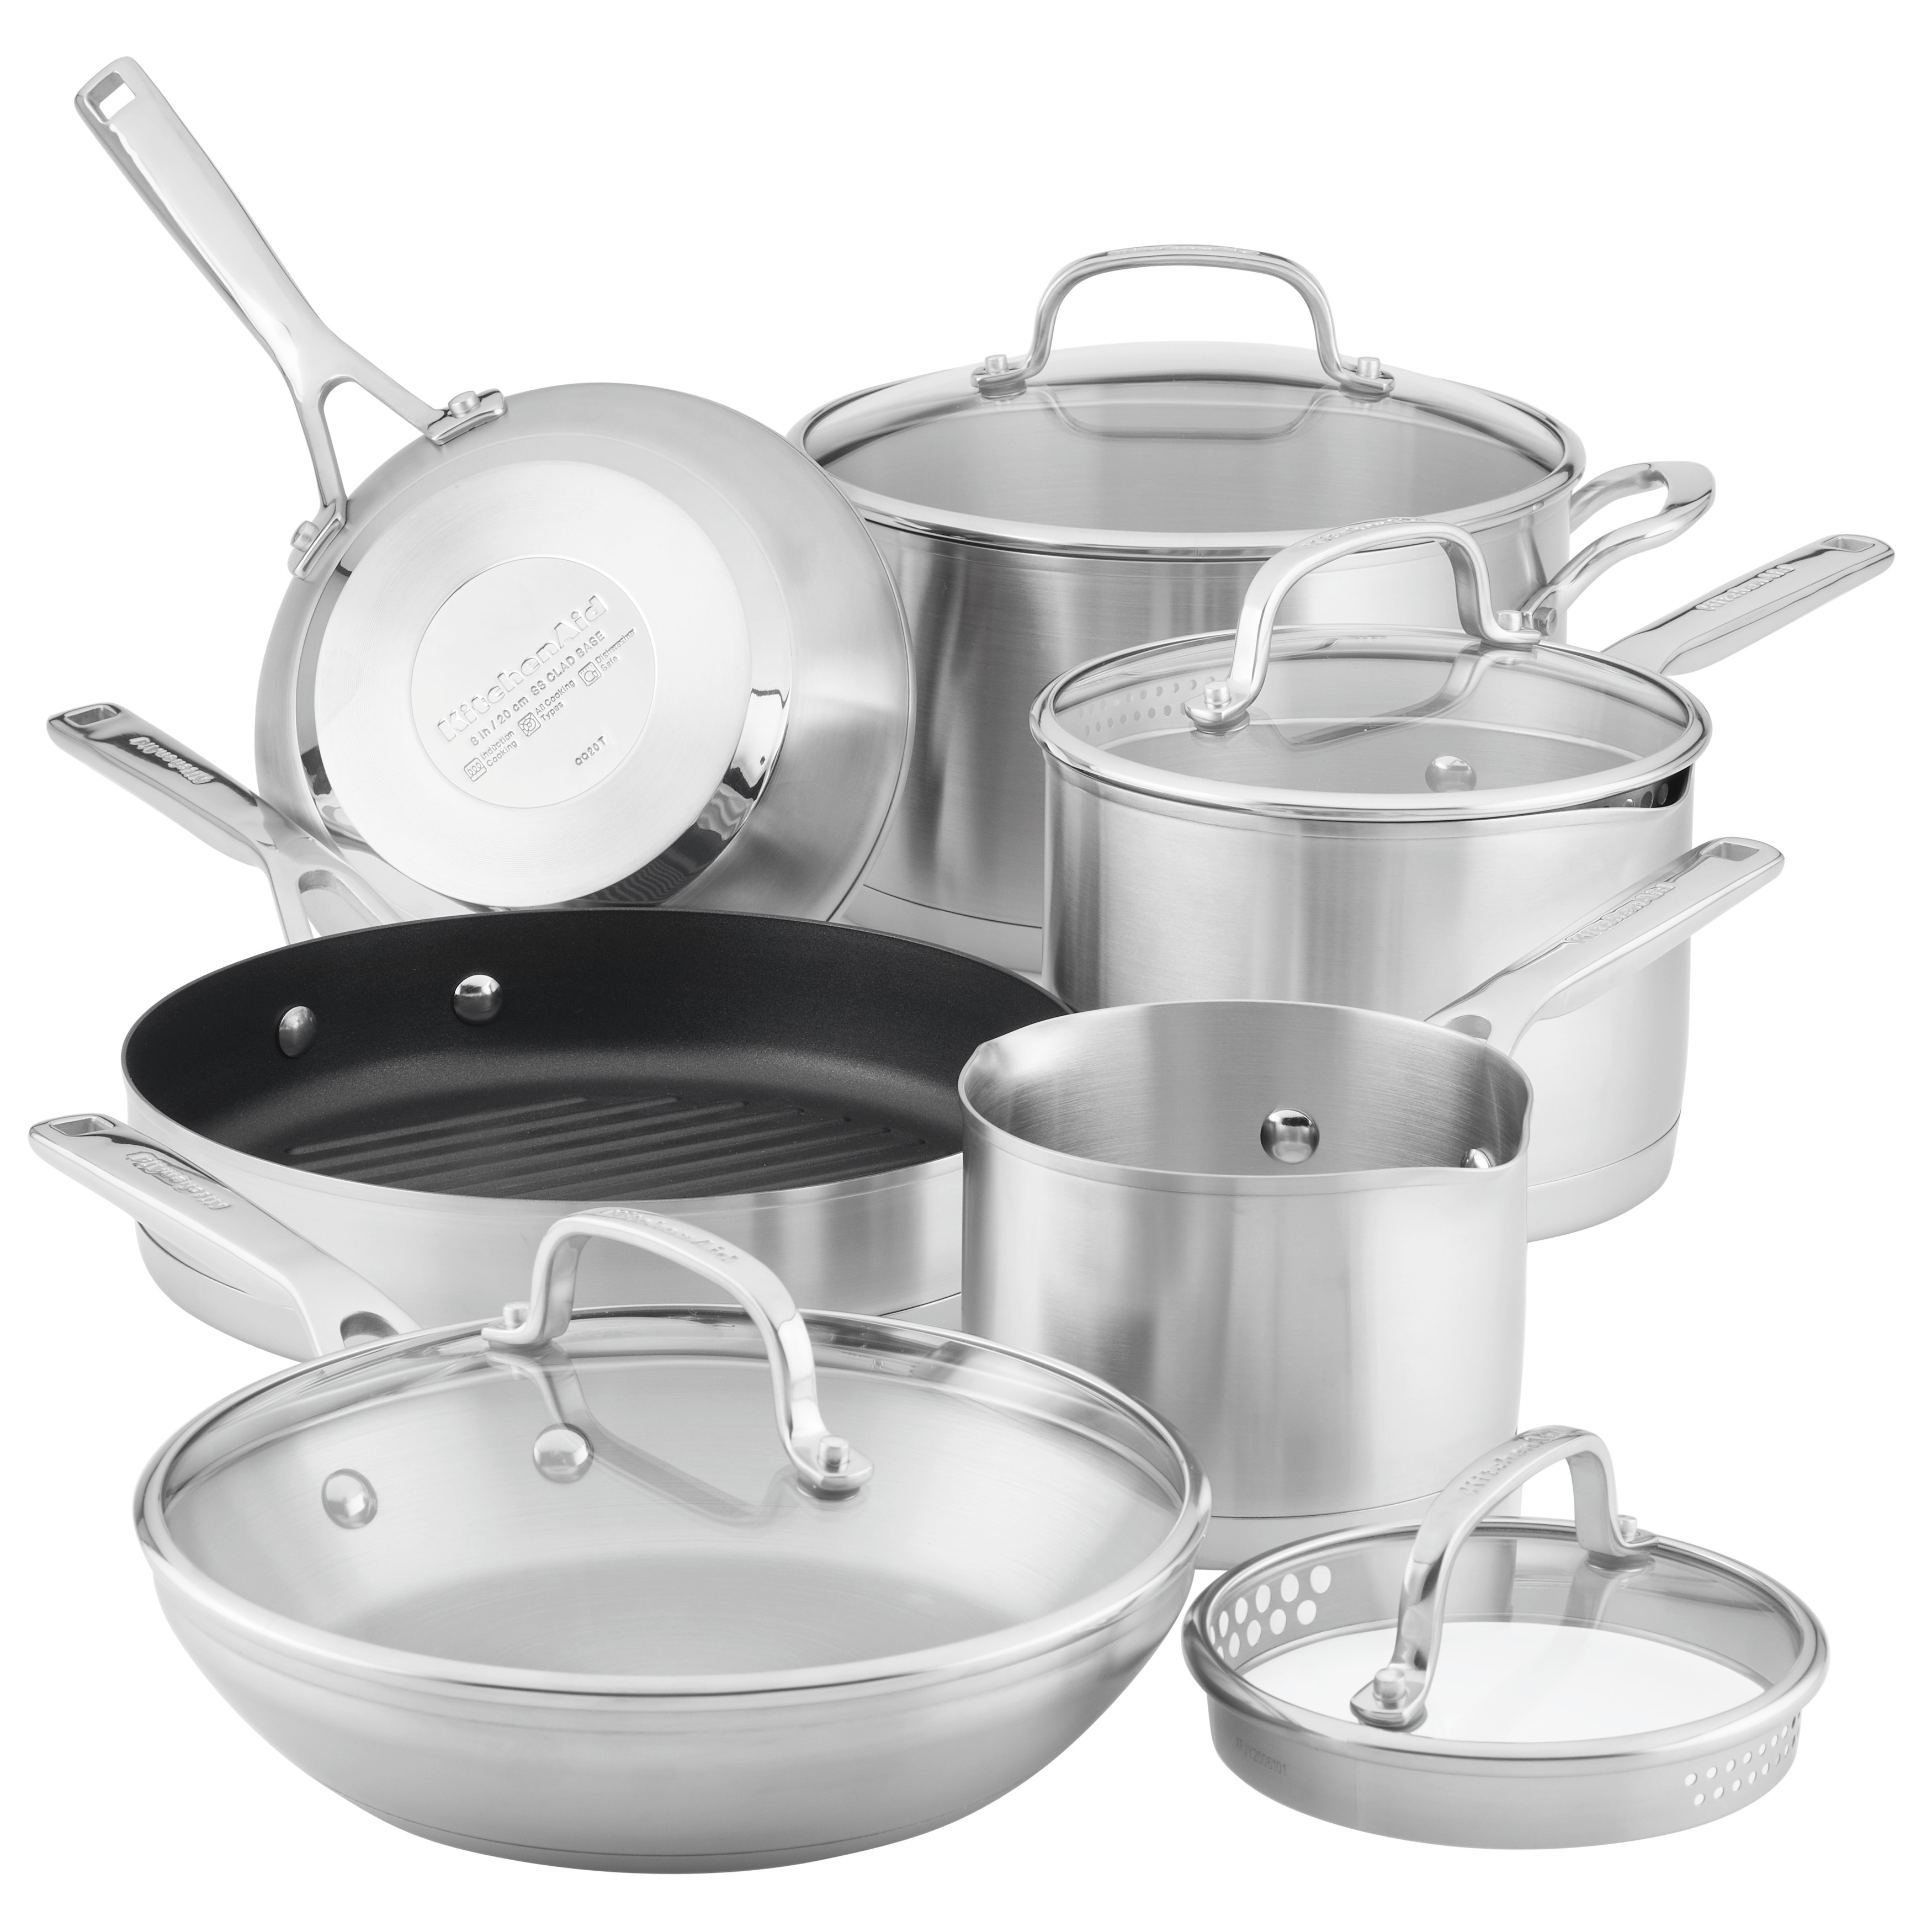 https://ak1.ostkcdn.com/images/products/is/images/direct/edecd0a50f74459c1e8f711c0b80b2a8c84980c1/KitchenAid-3-Ply-Base-Stainless-Steel-Cookware-Induction-Pots-and-Pans-Set%2C-10-Piece%2C-Brushed-Stainless-Steel.jpg